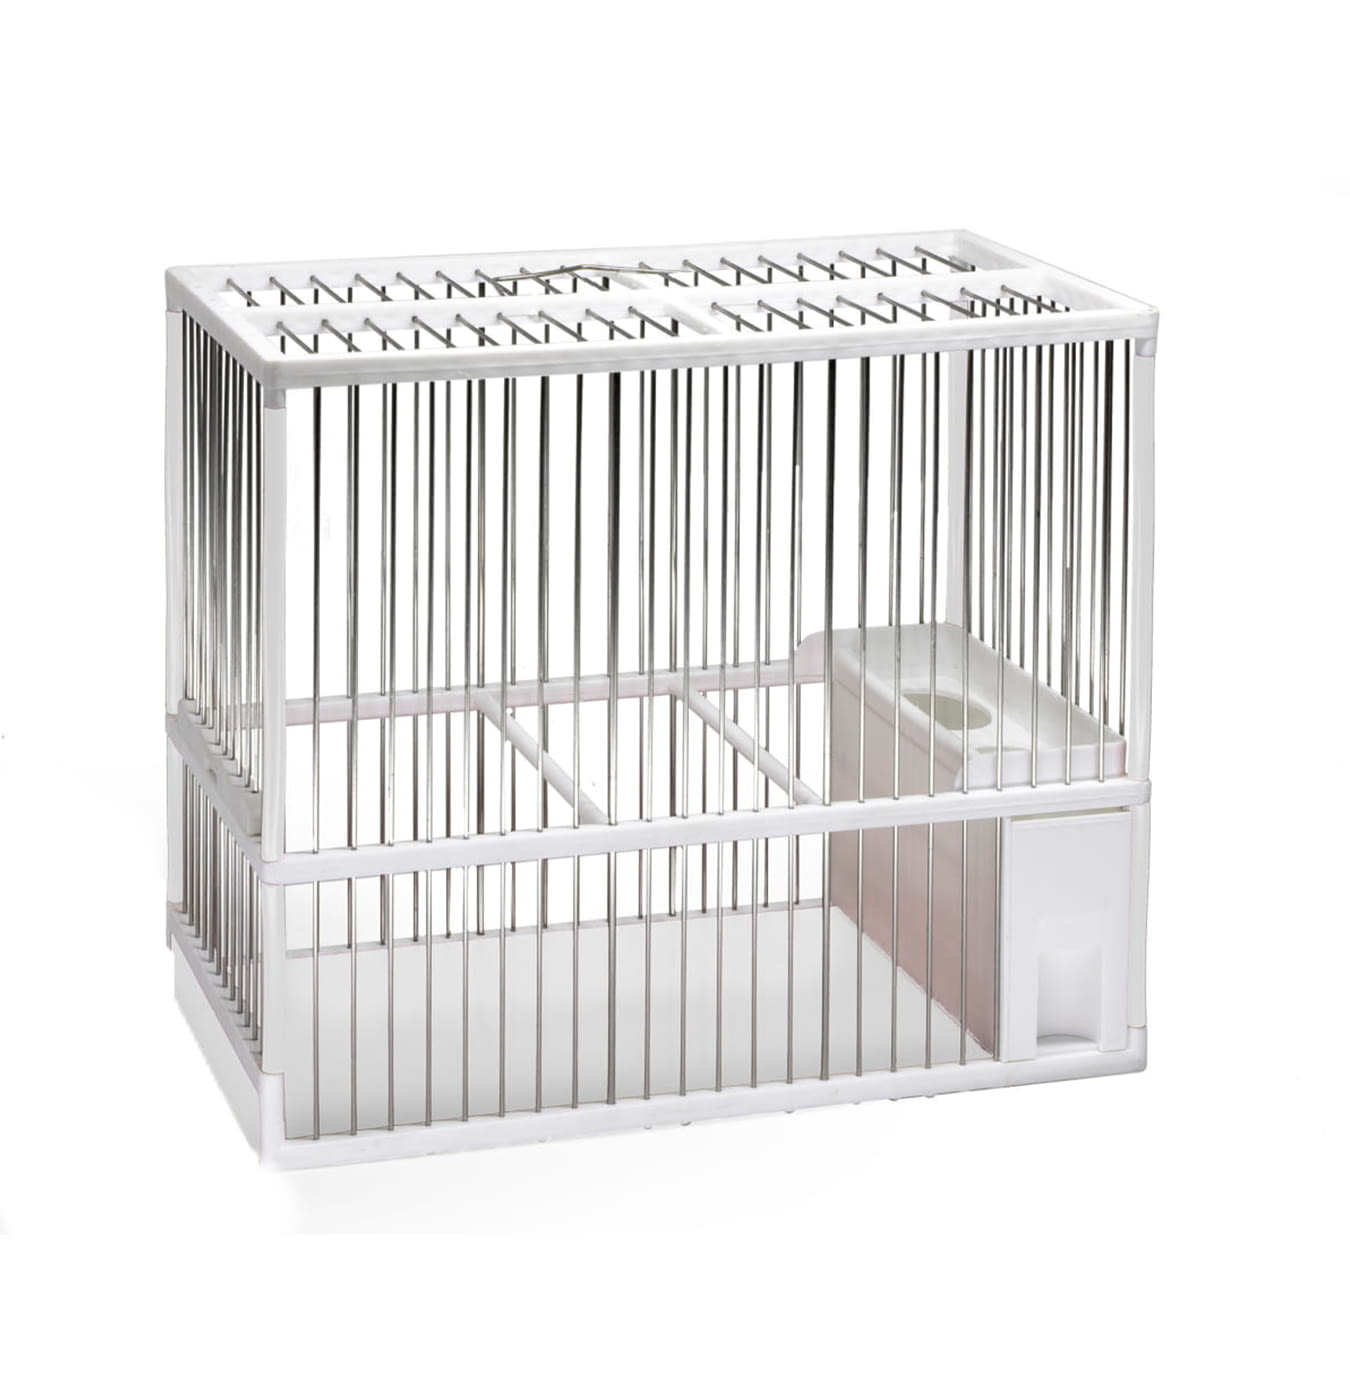 REF - 1004.2 LARGE COMPETITION CAGE GALVANIZED IRON WHITE COLOUR